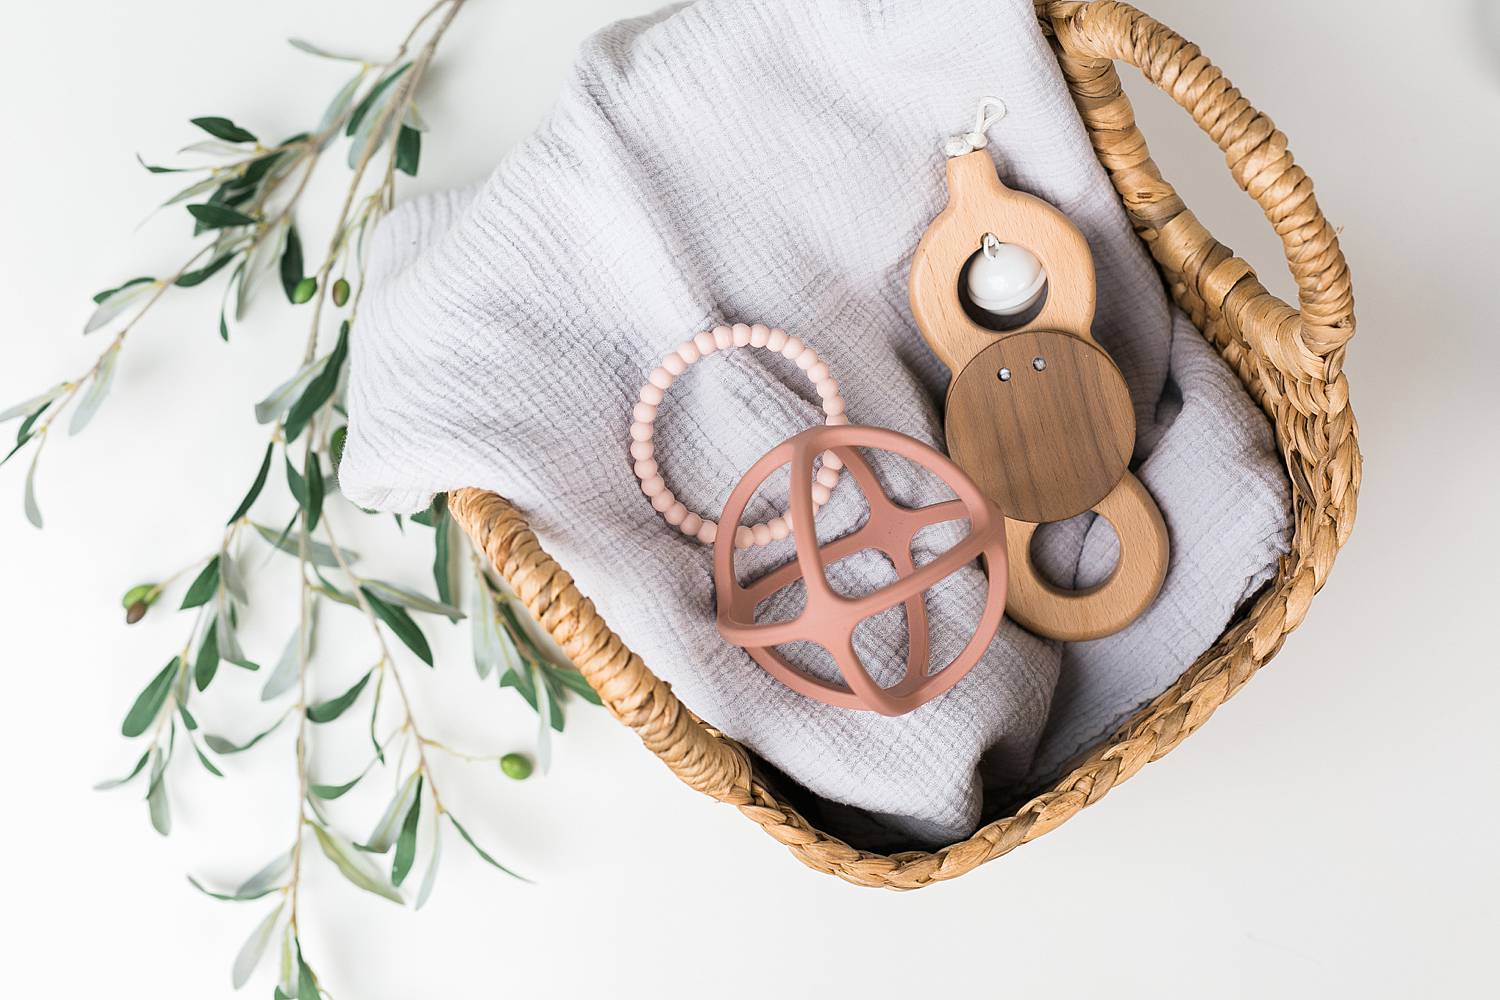 toys in a basket, boho feel with wooden toys and olive tree stem in the background